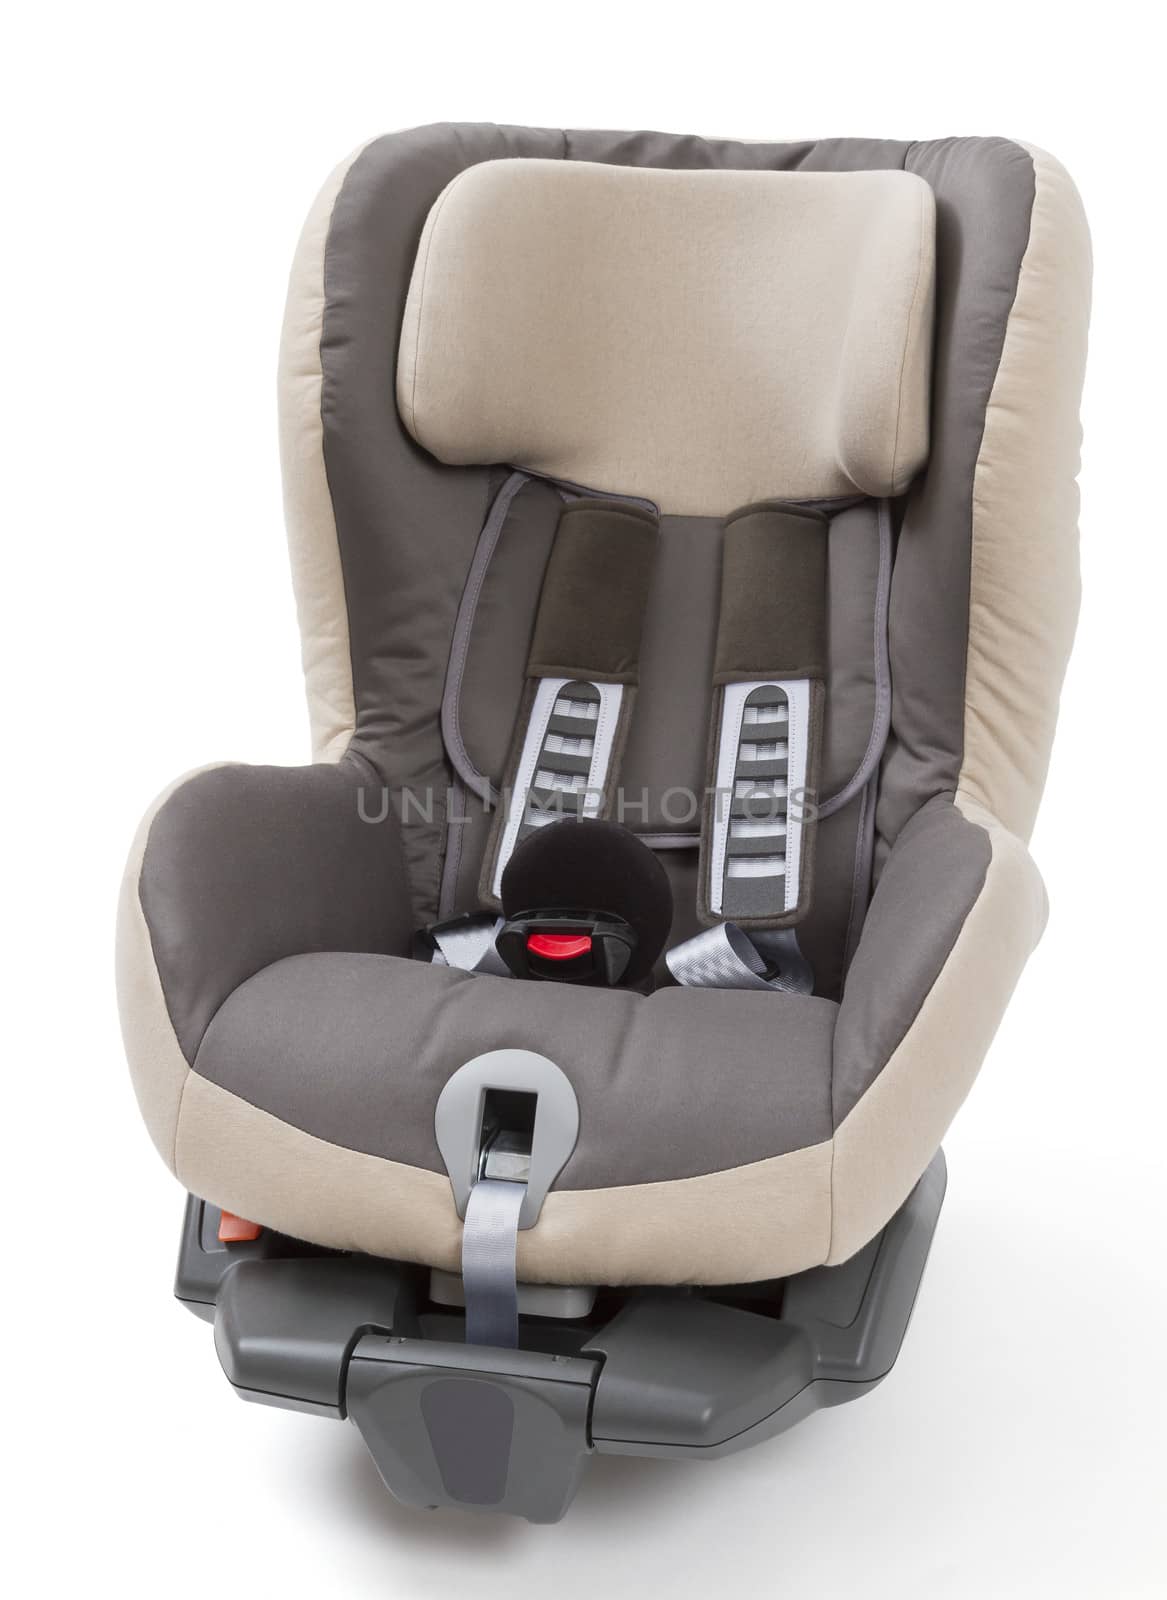 booster seat for a car in light background. studio shot without kid